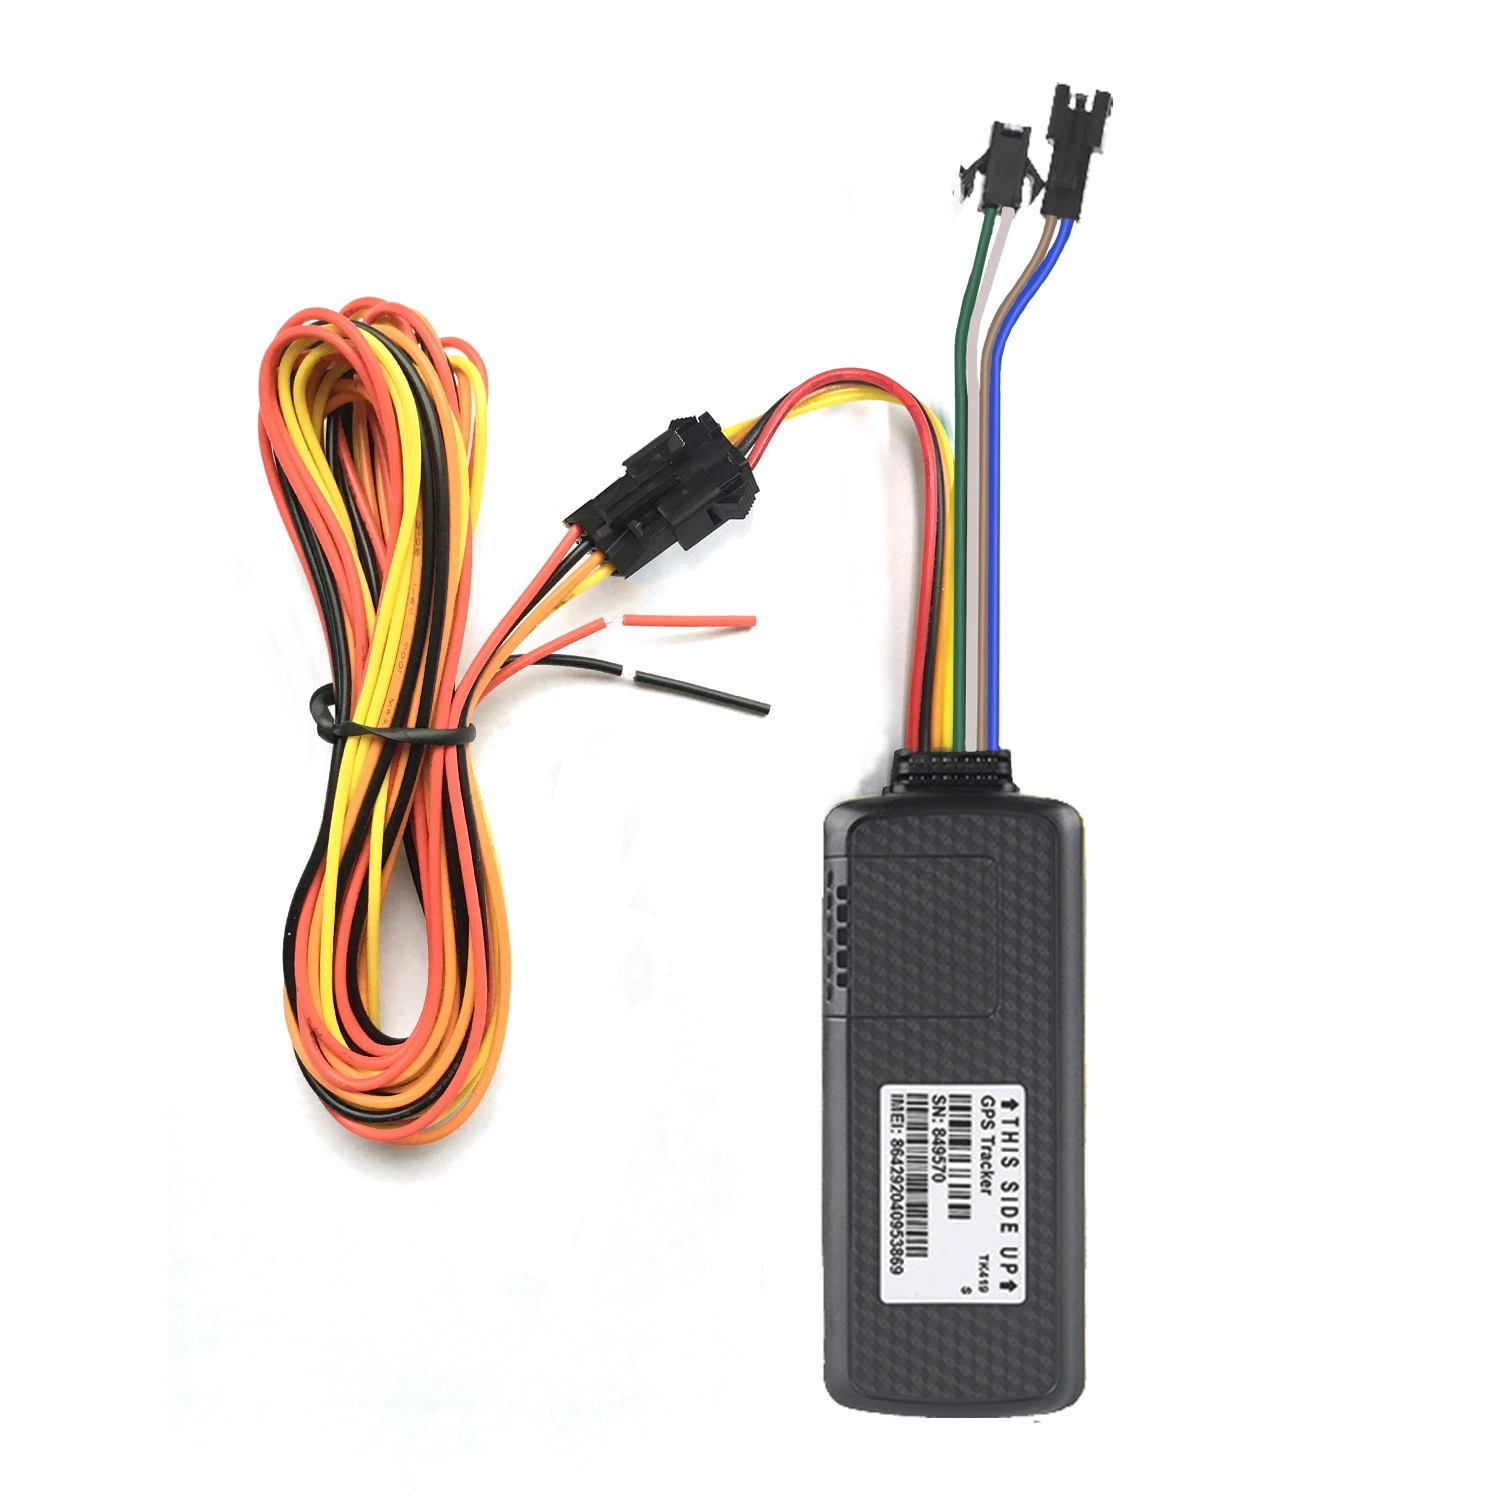 Hardwired Vehicle Tracking Device with GPS Tracking